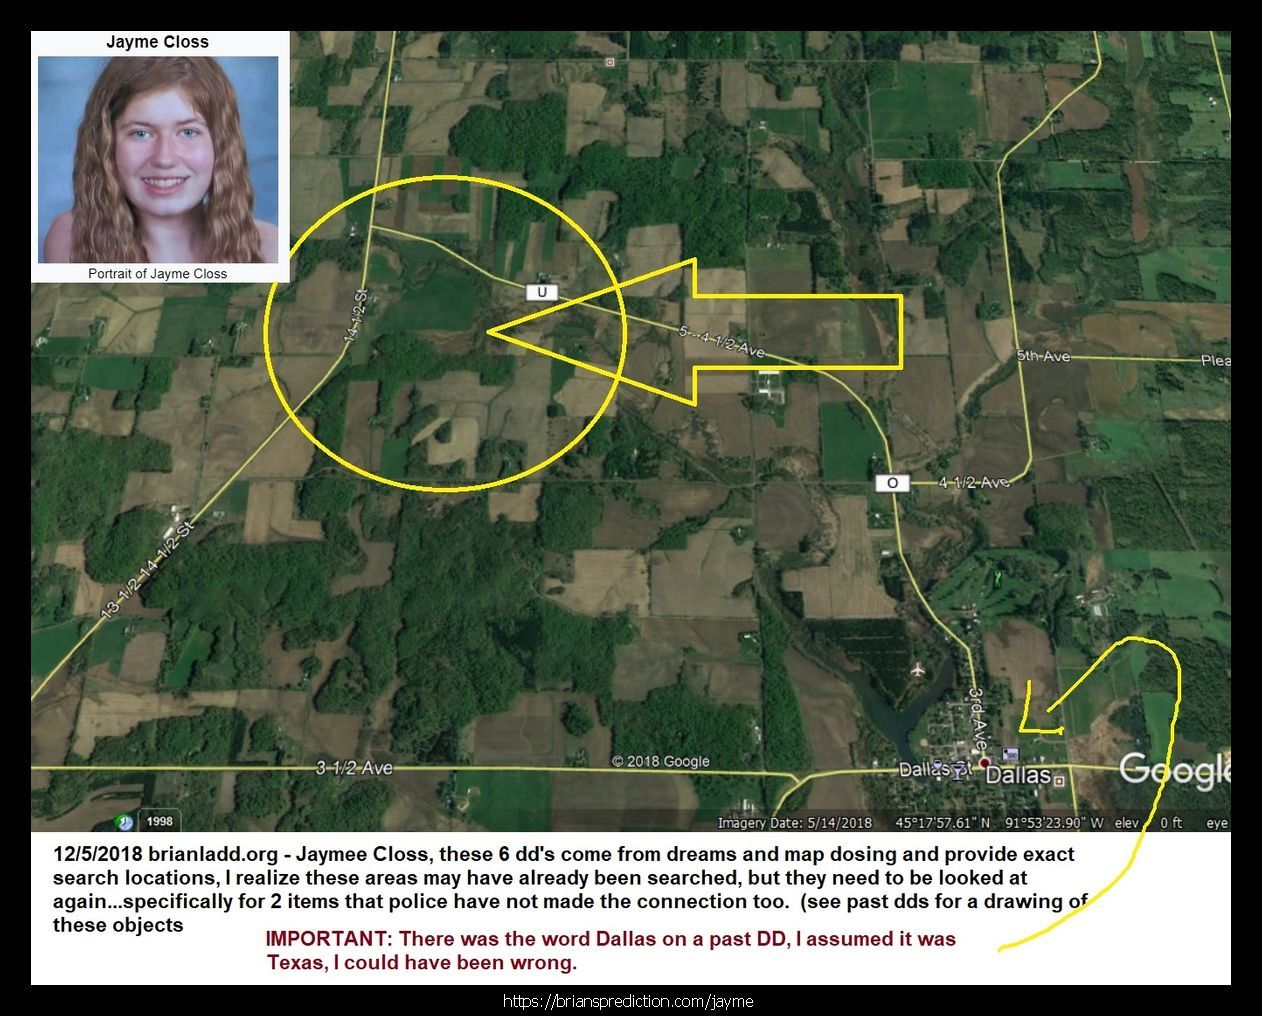 Jayme Closs Found Jaymee Closs 11417 6 December 2018 2 - 1/12/2019 These Are The Dream Drawings Related To Missing Teen ...
1/12/2019 These Are The Dream Drawings Related To Missing Teen Jayme Lynn Closs The Murder Of  James Closs And Denise Closs (all From 2018)  I'M Aware Of Her Being Located On January 10th, 2019.  There Are Many Things That Do Seem To Make So Far And I Think There Is More To The Case Than Murder And Kidnapping And Lae May Be Missing Something Very Important And Involve Many More People  Will Post New Updates At   https://briansprediction.com/Jayme  Dream Text  Going To Kill Her, The Trailer Is At Cenex In Barron.  Jayme Closs, They Were In The House For 45 Minutes Before The Killings, Look Under The House Again.  Jaymee Closs Found, Go Back Look In The Crawlspace, The Phone She Used To Talk To Him Is There, Cars Unrelated, Motorcycle, Police Missed The Box?  Jayme Closs, Body Found 6 Miles From Home, January 12th, 2019, Lazy Eye, Returns To Home (this Is For January 2019 And Does Not Mean She Has Already Been Murdered)  Jaymee Closs Found, Look Again, Drove Right By The Trailer, Dallas (I Realize Dd Says Dallas, I Do Not Think This Trailer Is In Texas)  Jayme Closs Look Again, He'S Going To Kill Her On December 16th, Hania Aguila Killed December 25th, Numbers, Church, Trailer (may Not Be The Right Translation Of Last Nights Dream But I Will Be Posting Additional Dreams On These 2 Cases In A Few Day  Trailer, He Took Her Here, Hania Noelia Aguilar Found, Fire Tower, 27, More Numbers.  He'S Taking Another Girl, Trailer, December 2018  Mollie Tibbits Is Still Alive After Killing, Trailer, 27, 27, 57 Feet, Fire Tower, He Going To Take Another Girl - Always 2. I'M Aware She Is Not Alive And I'M Not Sure What This Means.  Hania Aguilar Case May Be Related To The Jayme Closs Case An Could Explain Why I'M Having So Much Difficulty Finding This Trailer.  Jayme Closs Is Still Alive In Trailer, Lacross Thee Dreams Are From November 11th - 13th 2018 And Are From My Hospital Room In Port Saint Lucie Florida. Please Visit My Site News For More Details On This Case At   https://briansprediction.com/News.Php  Jayme Closs, Police Are Withholding This Item, Someone Knows When She Had This, Drugs (meth) Are Being Shipped In And Out Of Turkey Plant In The Bird'S Cavities, Road Dogs Biker Gang.  Box In Truck, Colton Treu, Was In Rice Lake, Eau Claire, Refrigerated Trailer, Knows Where Jayme Closs Is?  The Man At Cameron? Who Will Go To James Closs'S Funeral Is The Same Man Who Has Jayme Closs  10/24/2018 From All Thee Dream Drawings (dd's) This Is The Trailer Jayme Closs Is Being Held In. Dd States That Le Already Searched The Area But Did Not Break The Lock, The Man Who Took Jayme Has The Only Key.  2018 2 Psychic Prediction.Jpg  Connersville, Numbers, Jayme Cross (this Is Important)  Jayme, Look Again, She Missed It (Jayme Cross Search Area Related)  October 23rd, 2018 Jaymee Closs News Report? Links To Auto Garage And Moms Boyfriend, Rice Lake.  This Is The Same Trailer Related To The Jayme Cross Case.  124 Files On 2 Page(S)  Engle Creek Springs, Jayme (maybe Related To Jayme Cross Missing Teen Case, This Is A Real Location Map Included)  Dark Blue Car, I'M In The Back Seat And This Is What I Can See, There Are Crosses Handing Inside The Car And On The Floor (this Is A Lucid Dream Form 10/19 Or 10/20 Of 2018)  Engle Creek Springs, Jayme (maybe Related To Jayme Cross Missing Teen Case, This Is A Real Location Map Included)  Missing Teen Jayme Closs I Believe Will Be Located Shortly, I Will Post What I Can At   https://briansprediction.com/Jayme Expect Some Sort Of Update By Le On October 23rd And Much More To Follow!  Jayme Closs And The Deaths Of James Closs And Denise Closs 11185 16 October 2018 1 Psychic Prediction  Mithe Cartel Did Not Do This, Grain Silo (this May Or May Not Be Related To A Missing Person Case Jayme Closs)  Auto Garage And Flags Metal Rebar, Jayme Closs Would Walk Her To See Him, Go Back, Numbers.  Aka? Dawn Gordon Jayme Closs, Id, Renee Is A Hero, Rx (no Clue How This Is Related To Jayme Closs Missing Girl Case Unless Its Another Jayme, Awful Dream Though)  Road Block ??? Wisteria Lane South West In Adamsville, Missing Girl Jayme Closs With Steven K.  Jayme Closs, Wrong Information, She Had More Than One Fight With Her Parents, Look In Her Room Again (whatever Was Found In Her Room By Le Has More To It And Will Provide A More Accurate Location Than What They Are Going By Right Now)  Eau Claire, Jayme Closs Deerfield Road?  Missing Jayme Closs And The Deaths Of James Closs And Denise Closs.Jpg  Jayme Closs Search Map  Dna Of Steven Procopio Fount At Home Of James And Denise Closs In The Bathroom.  Jayme Closs And The Deaths Of James Closs And Denise Closs 11185 16 October 2018 1 Psychic Prediction.Jpg  These 2 Dd'S (dream Drawings) From 10-16-2018 Are Related To A Missing Girl Named Jayme Cross, I Have Opened A Case File Located At   https://briansprediction.com/Jayme  Jayme Closs And The Deaths Of James Closs And Denise Closs 11186 16 October 2018 2 Psy
